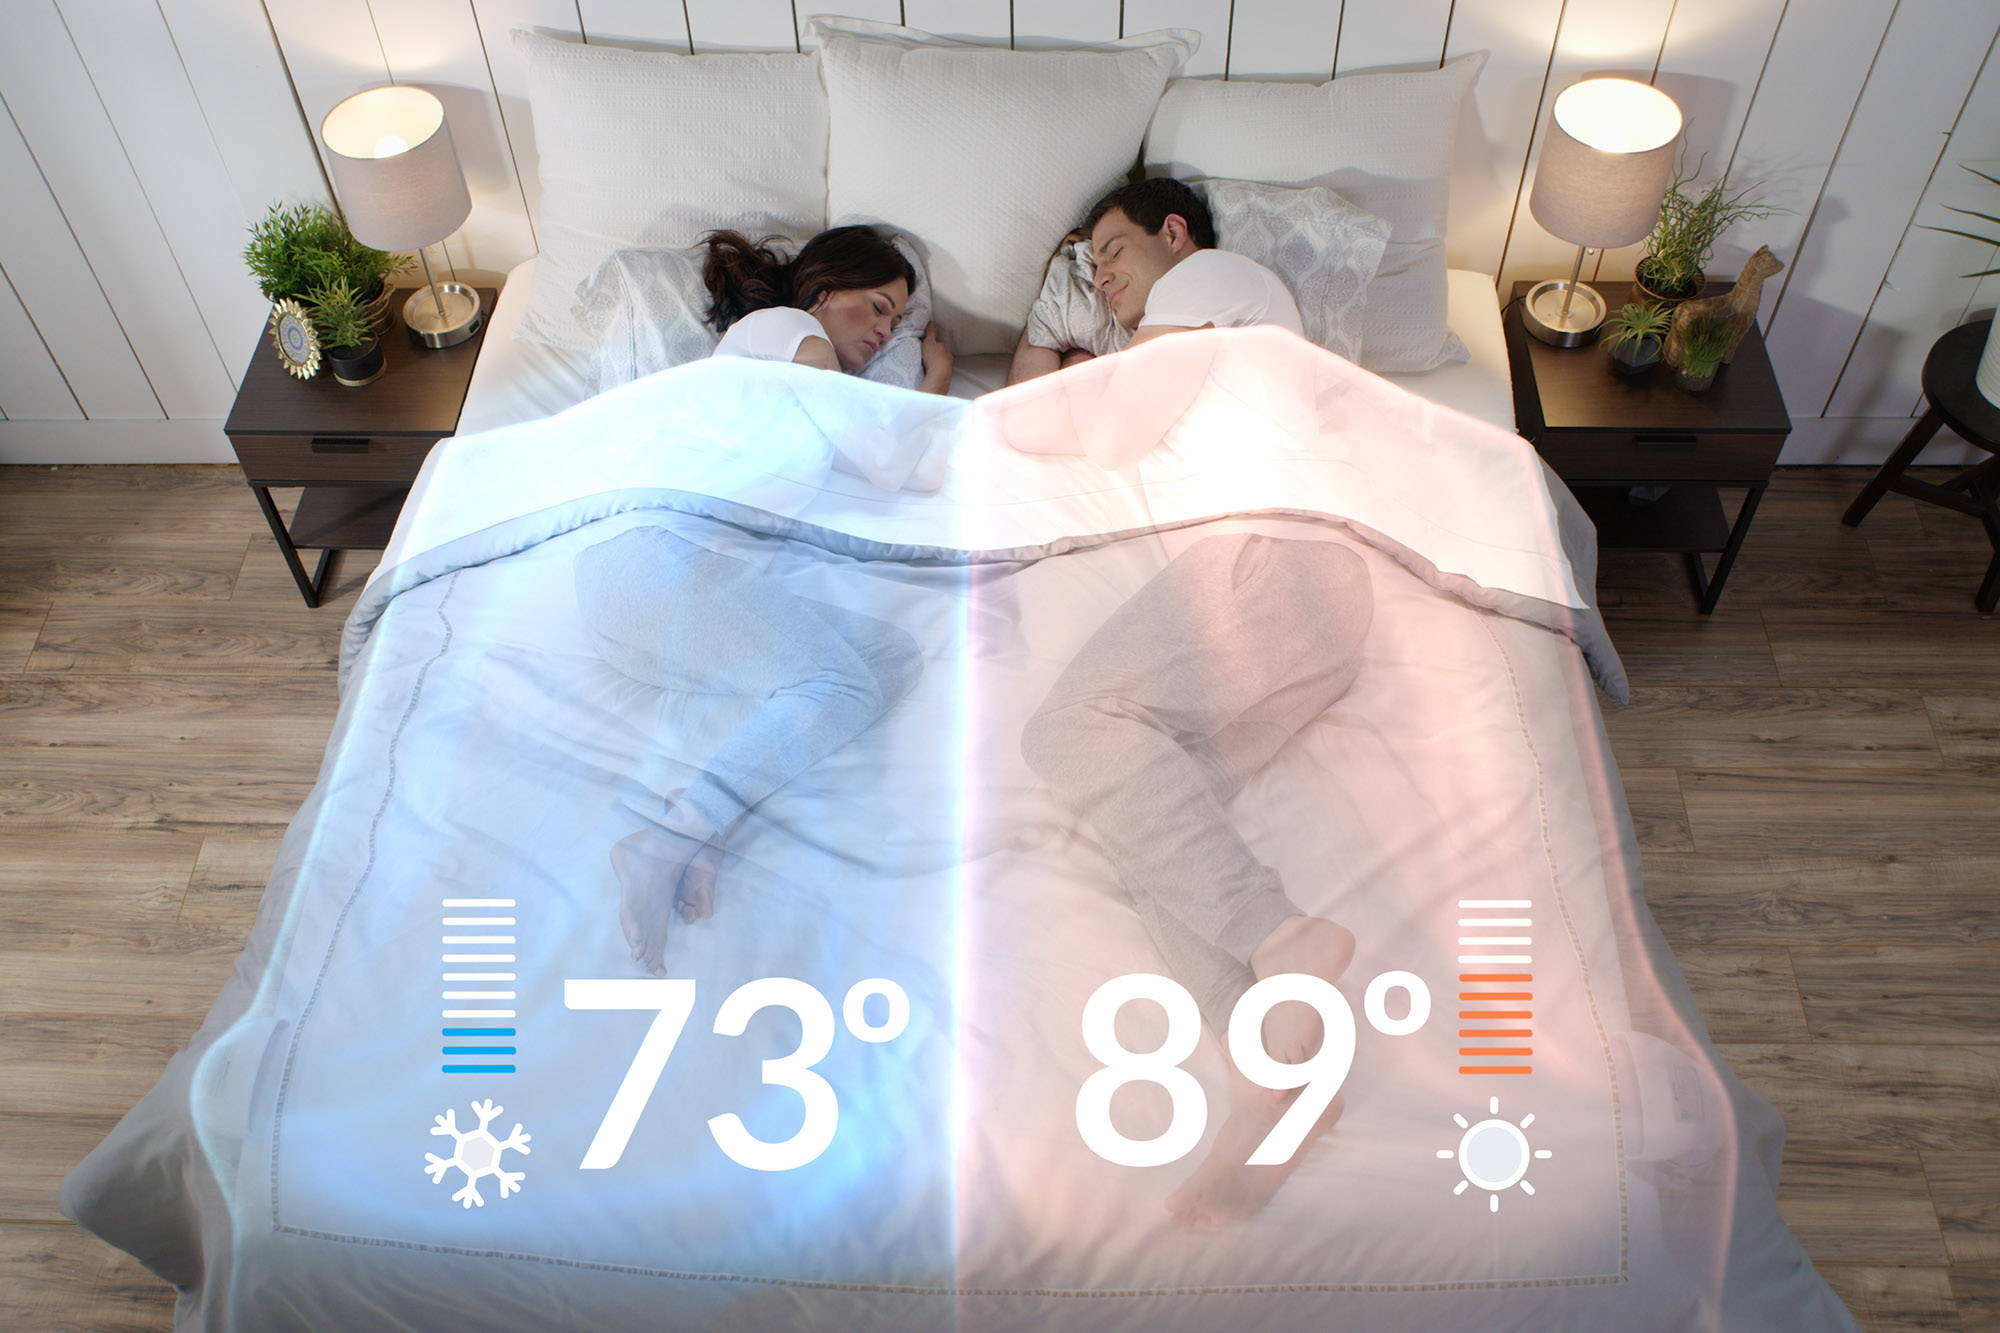 A couple sleeping in bed, the woman's BedJet has cooled her side to 73°F, the man's BedJet is set to warming at 89°F.